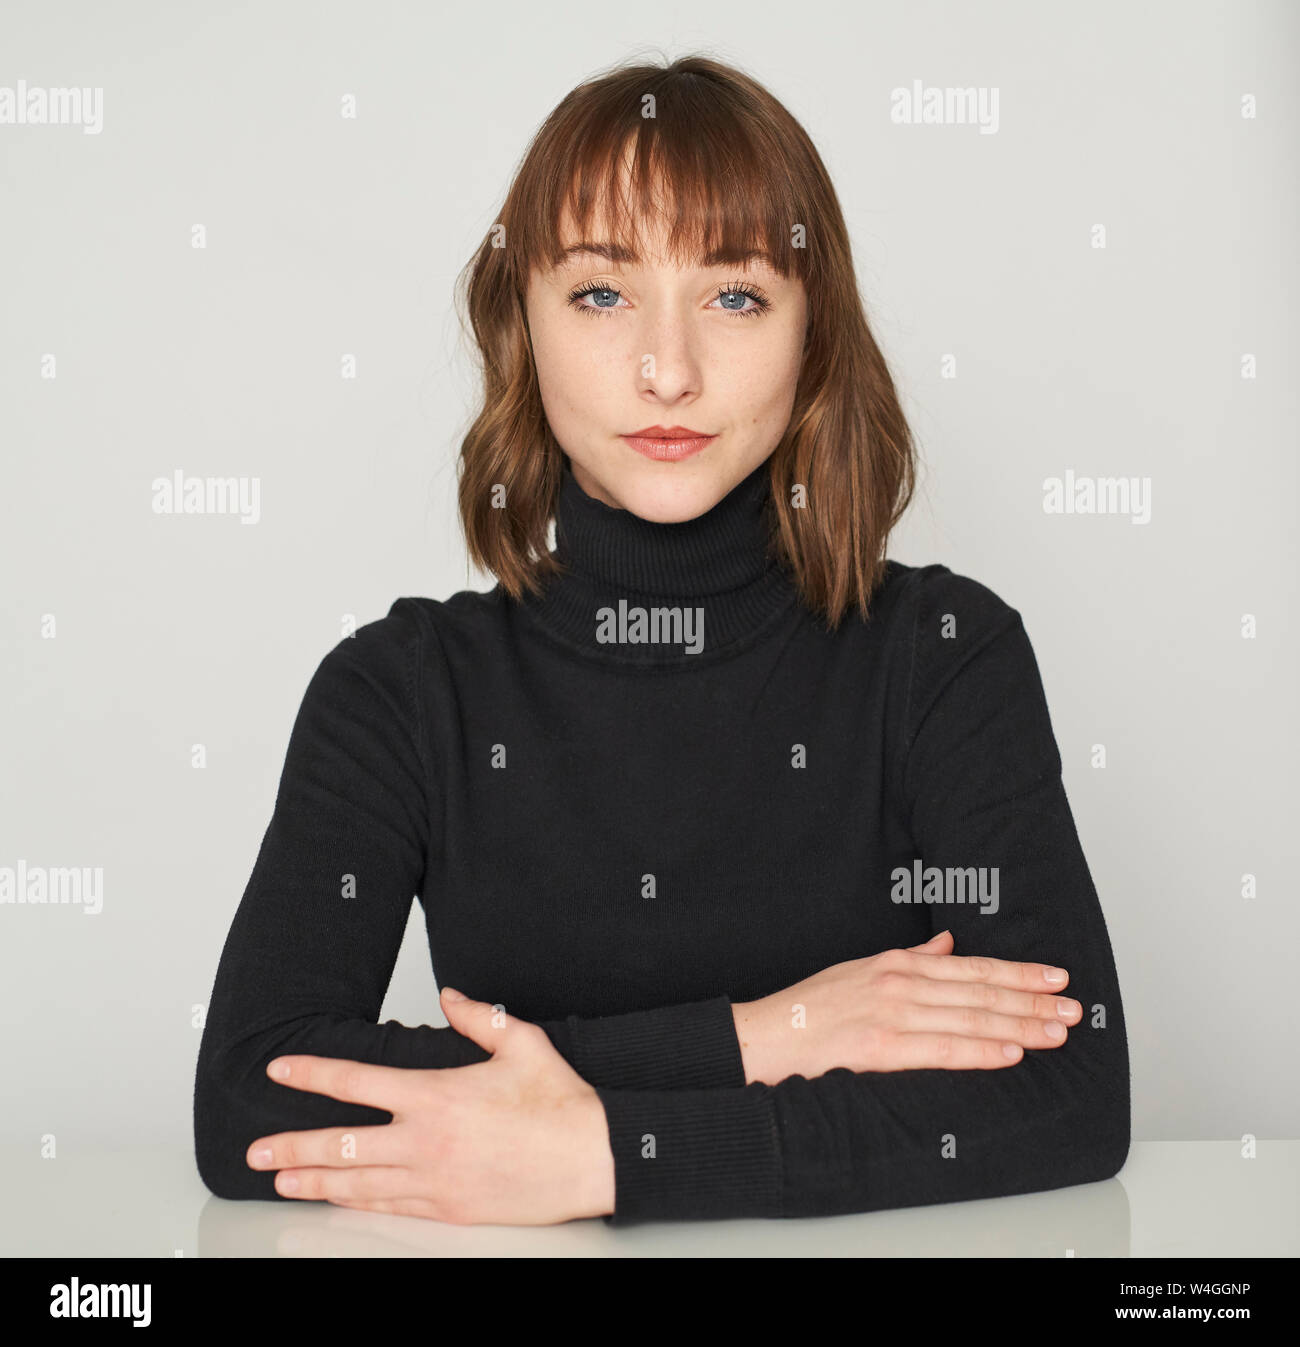 Portrait of serious young woman wearing black turtleneck pullover Stock Photo